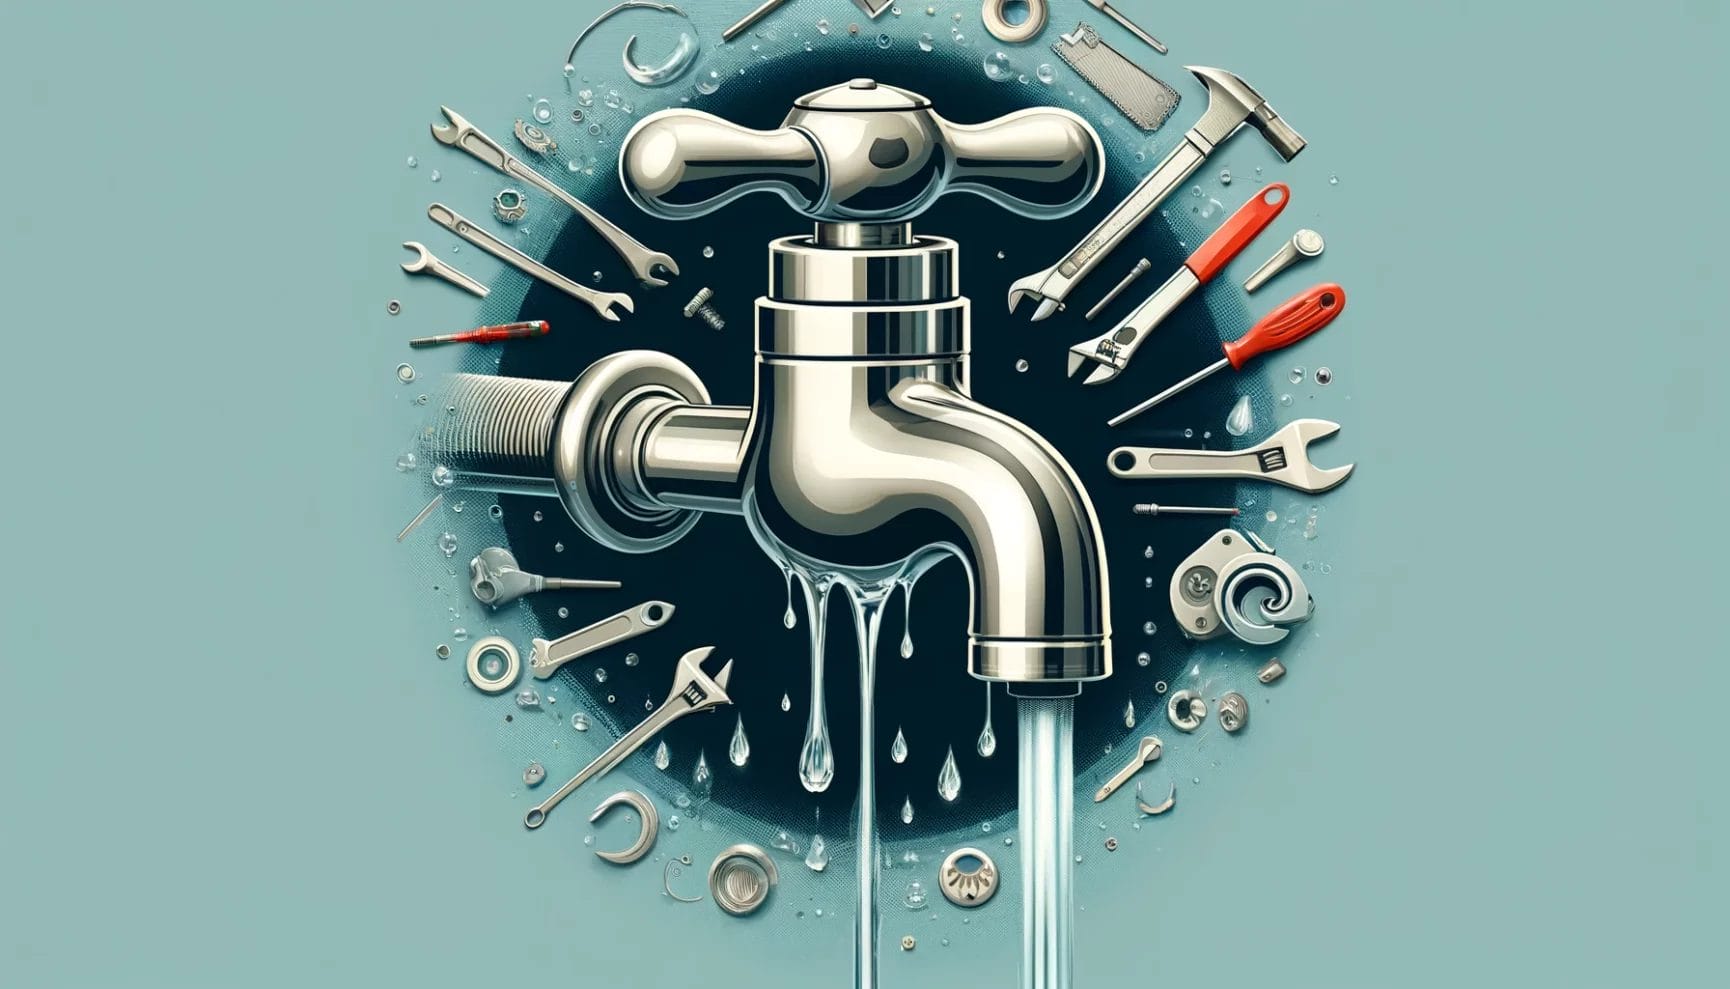 A tap with water droplets surrounded by an array of tools and mechanical parts on a blue background.